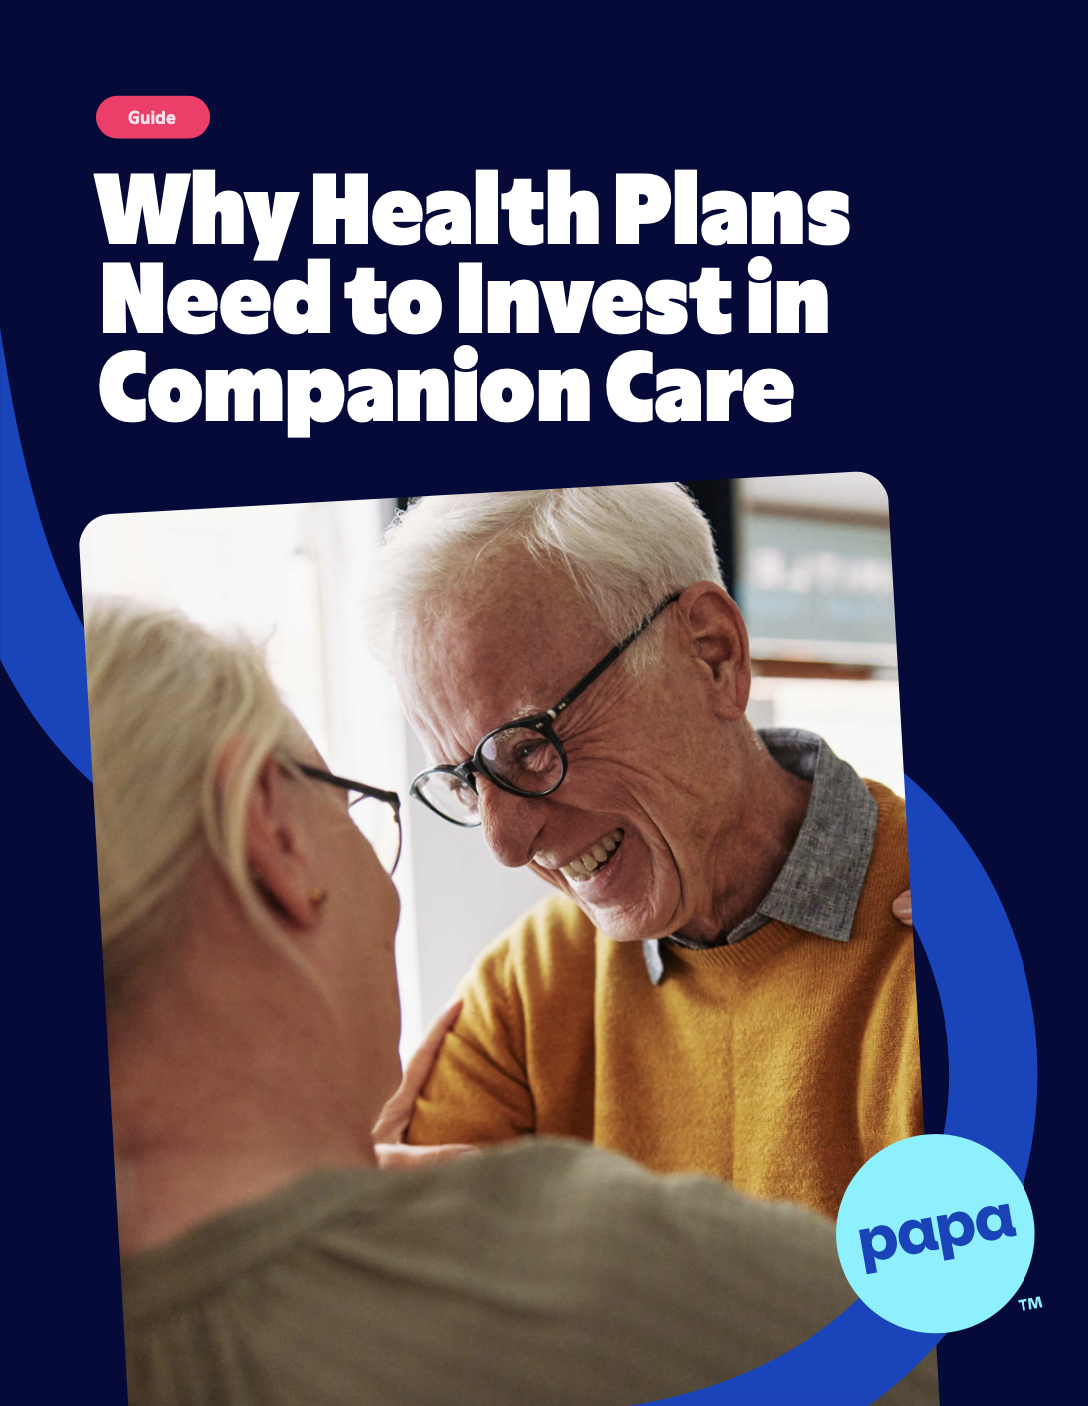 A guide for health plans looking to enhance their supplemental benefits in companion care